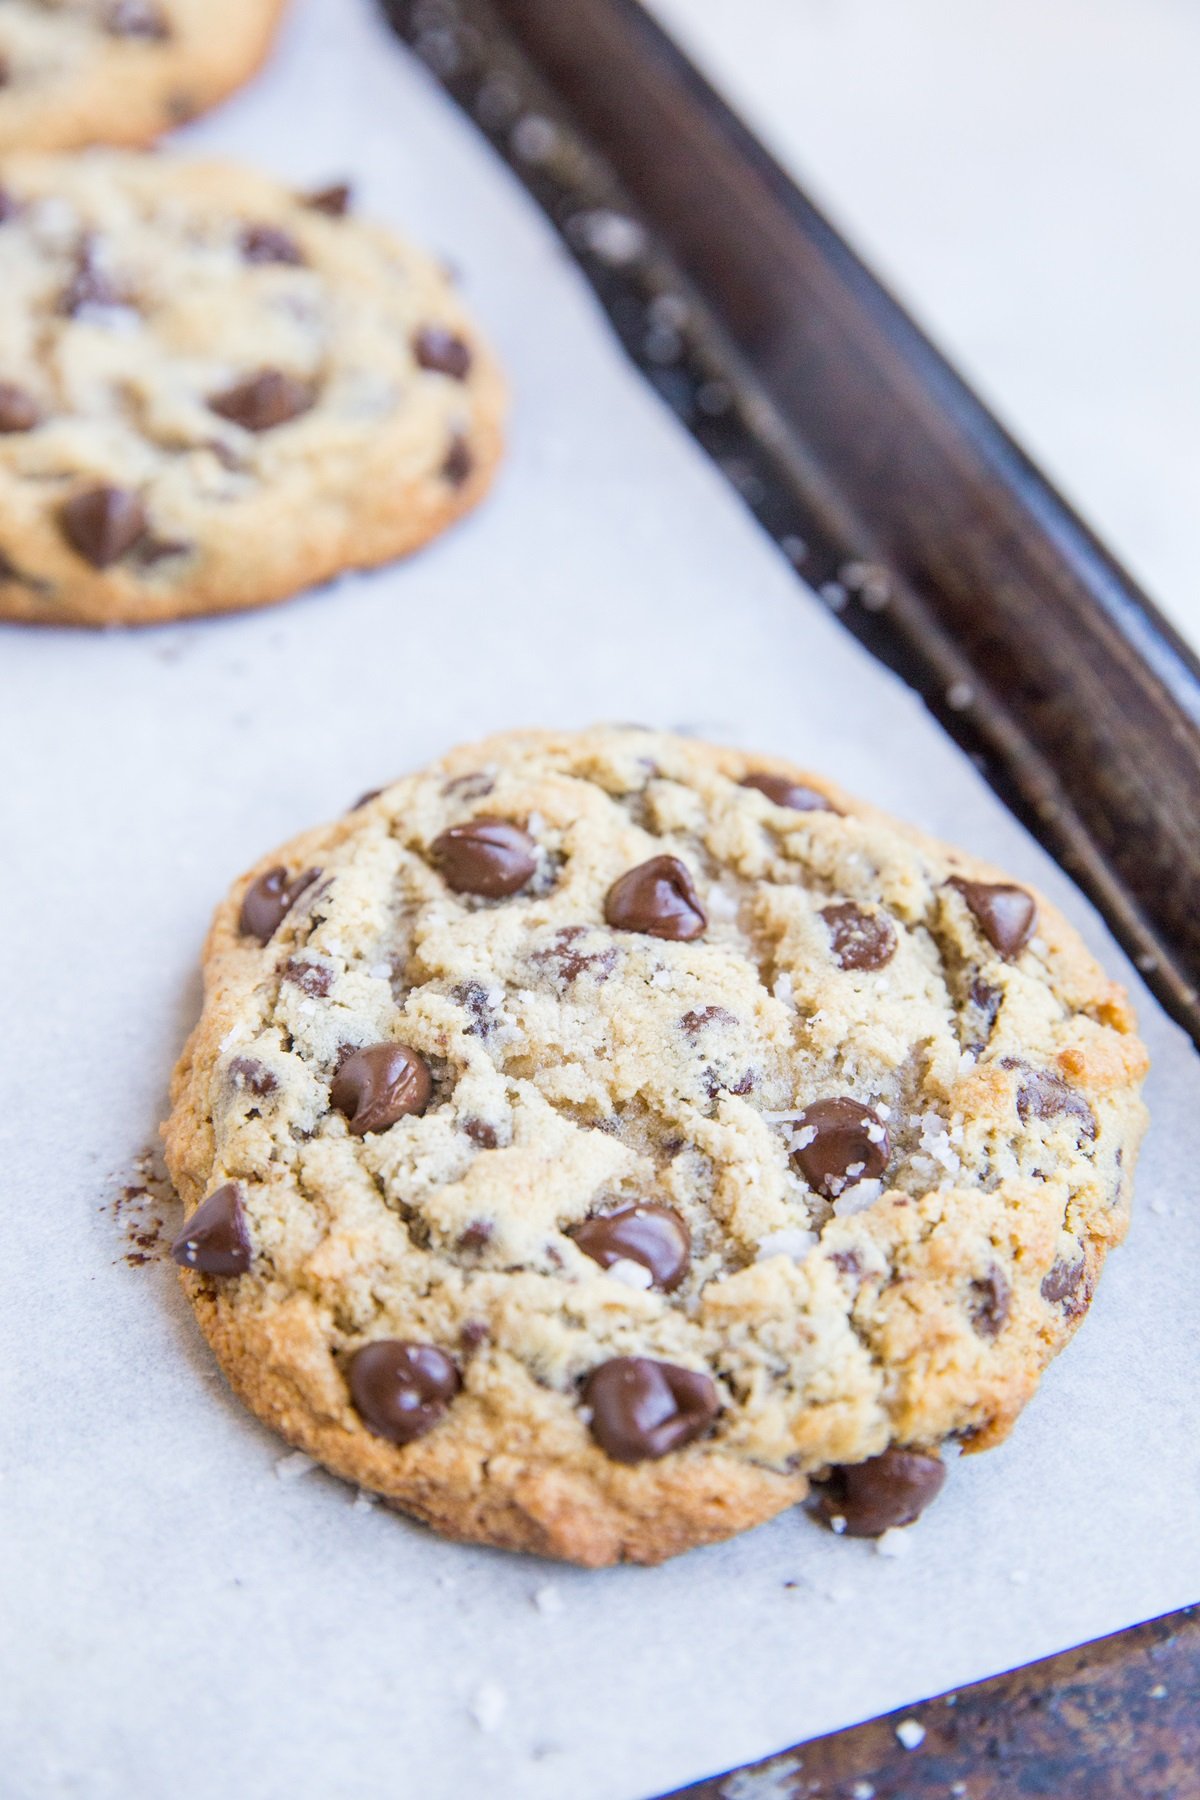 Giant Chewy Keto Chocolate Chip Cookies - jumbo cookies made sugar-free, grain-free, ultra gooey! You can't tell they aren't regular cookies!